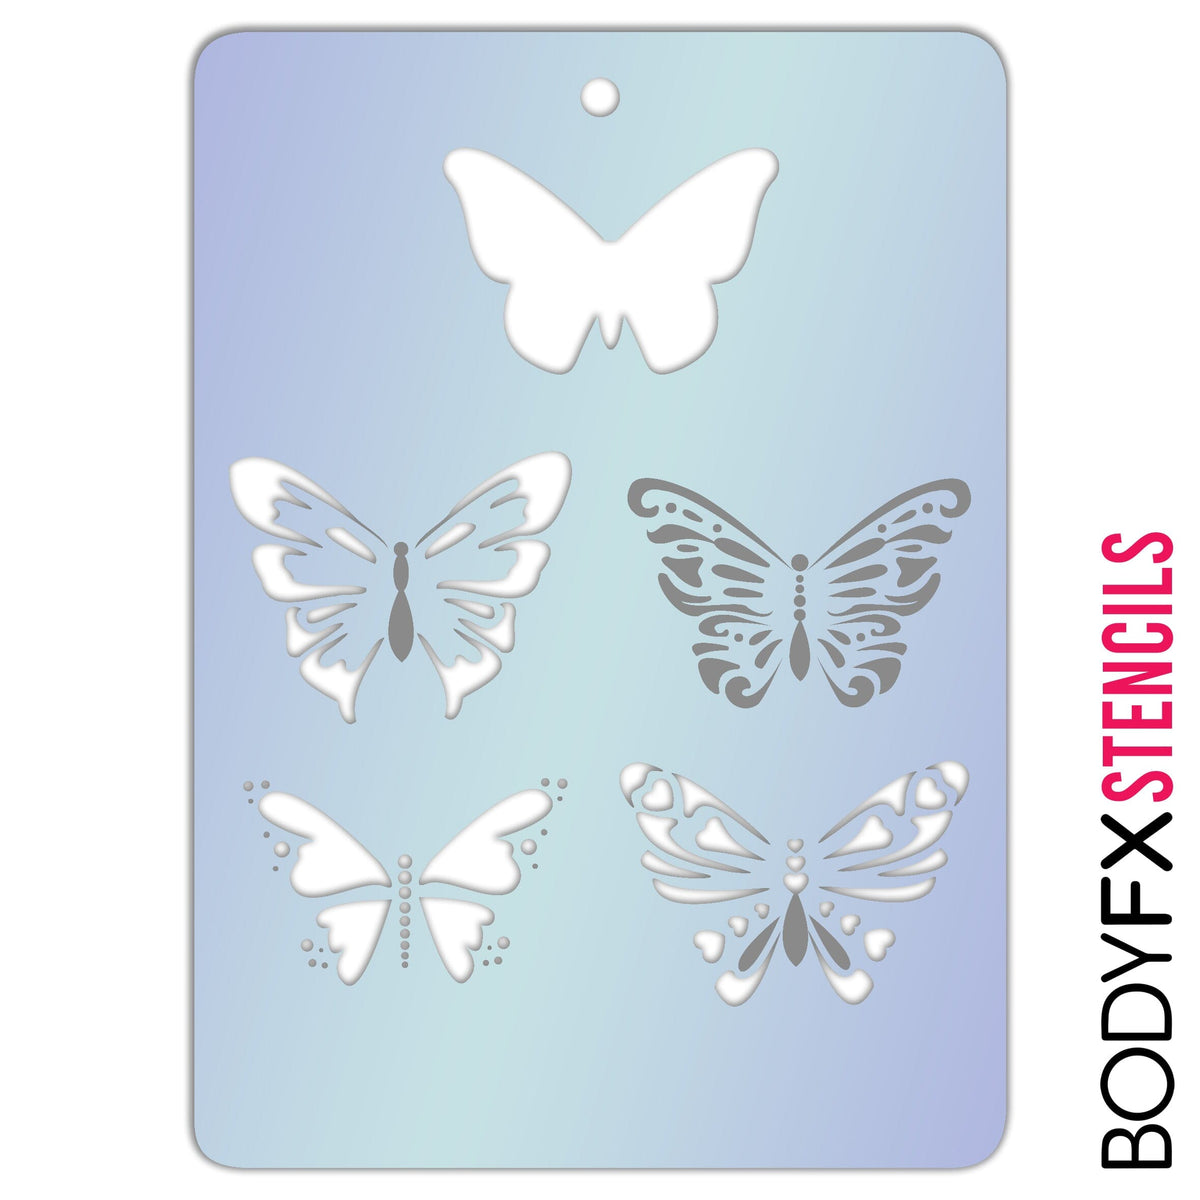 Butterfly Layer Stencil